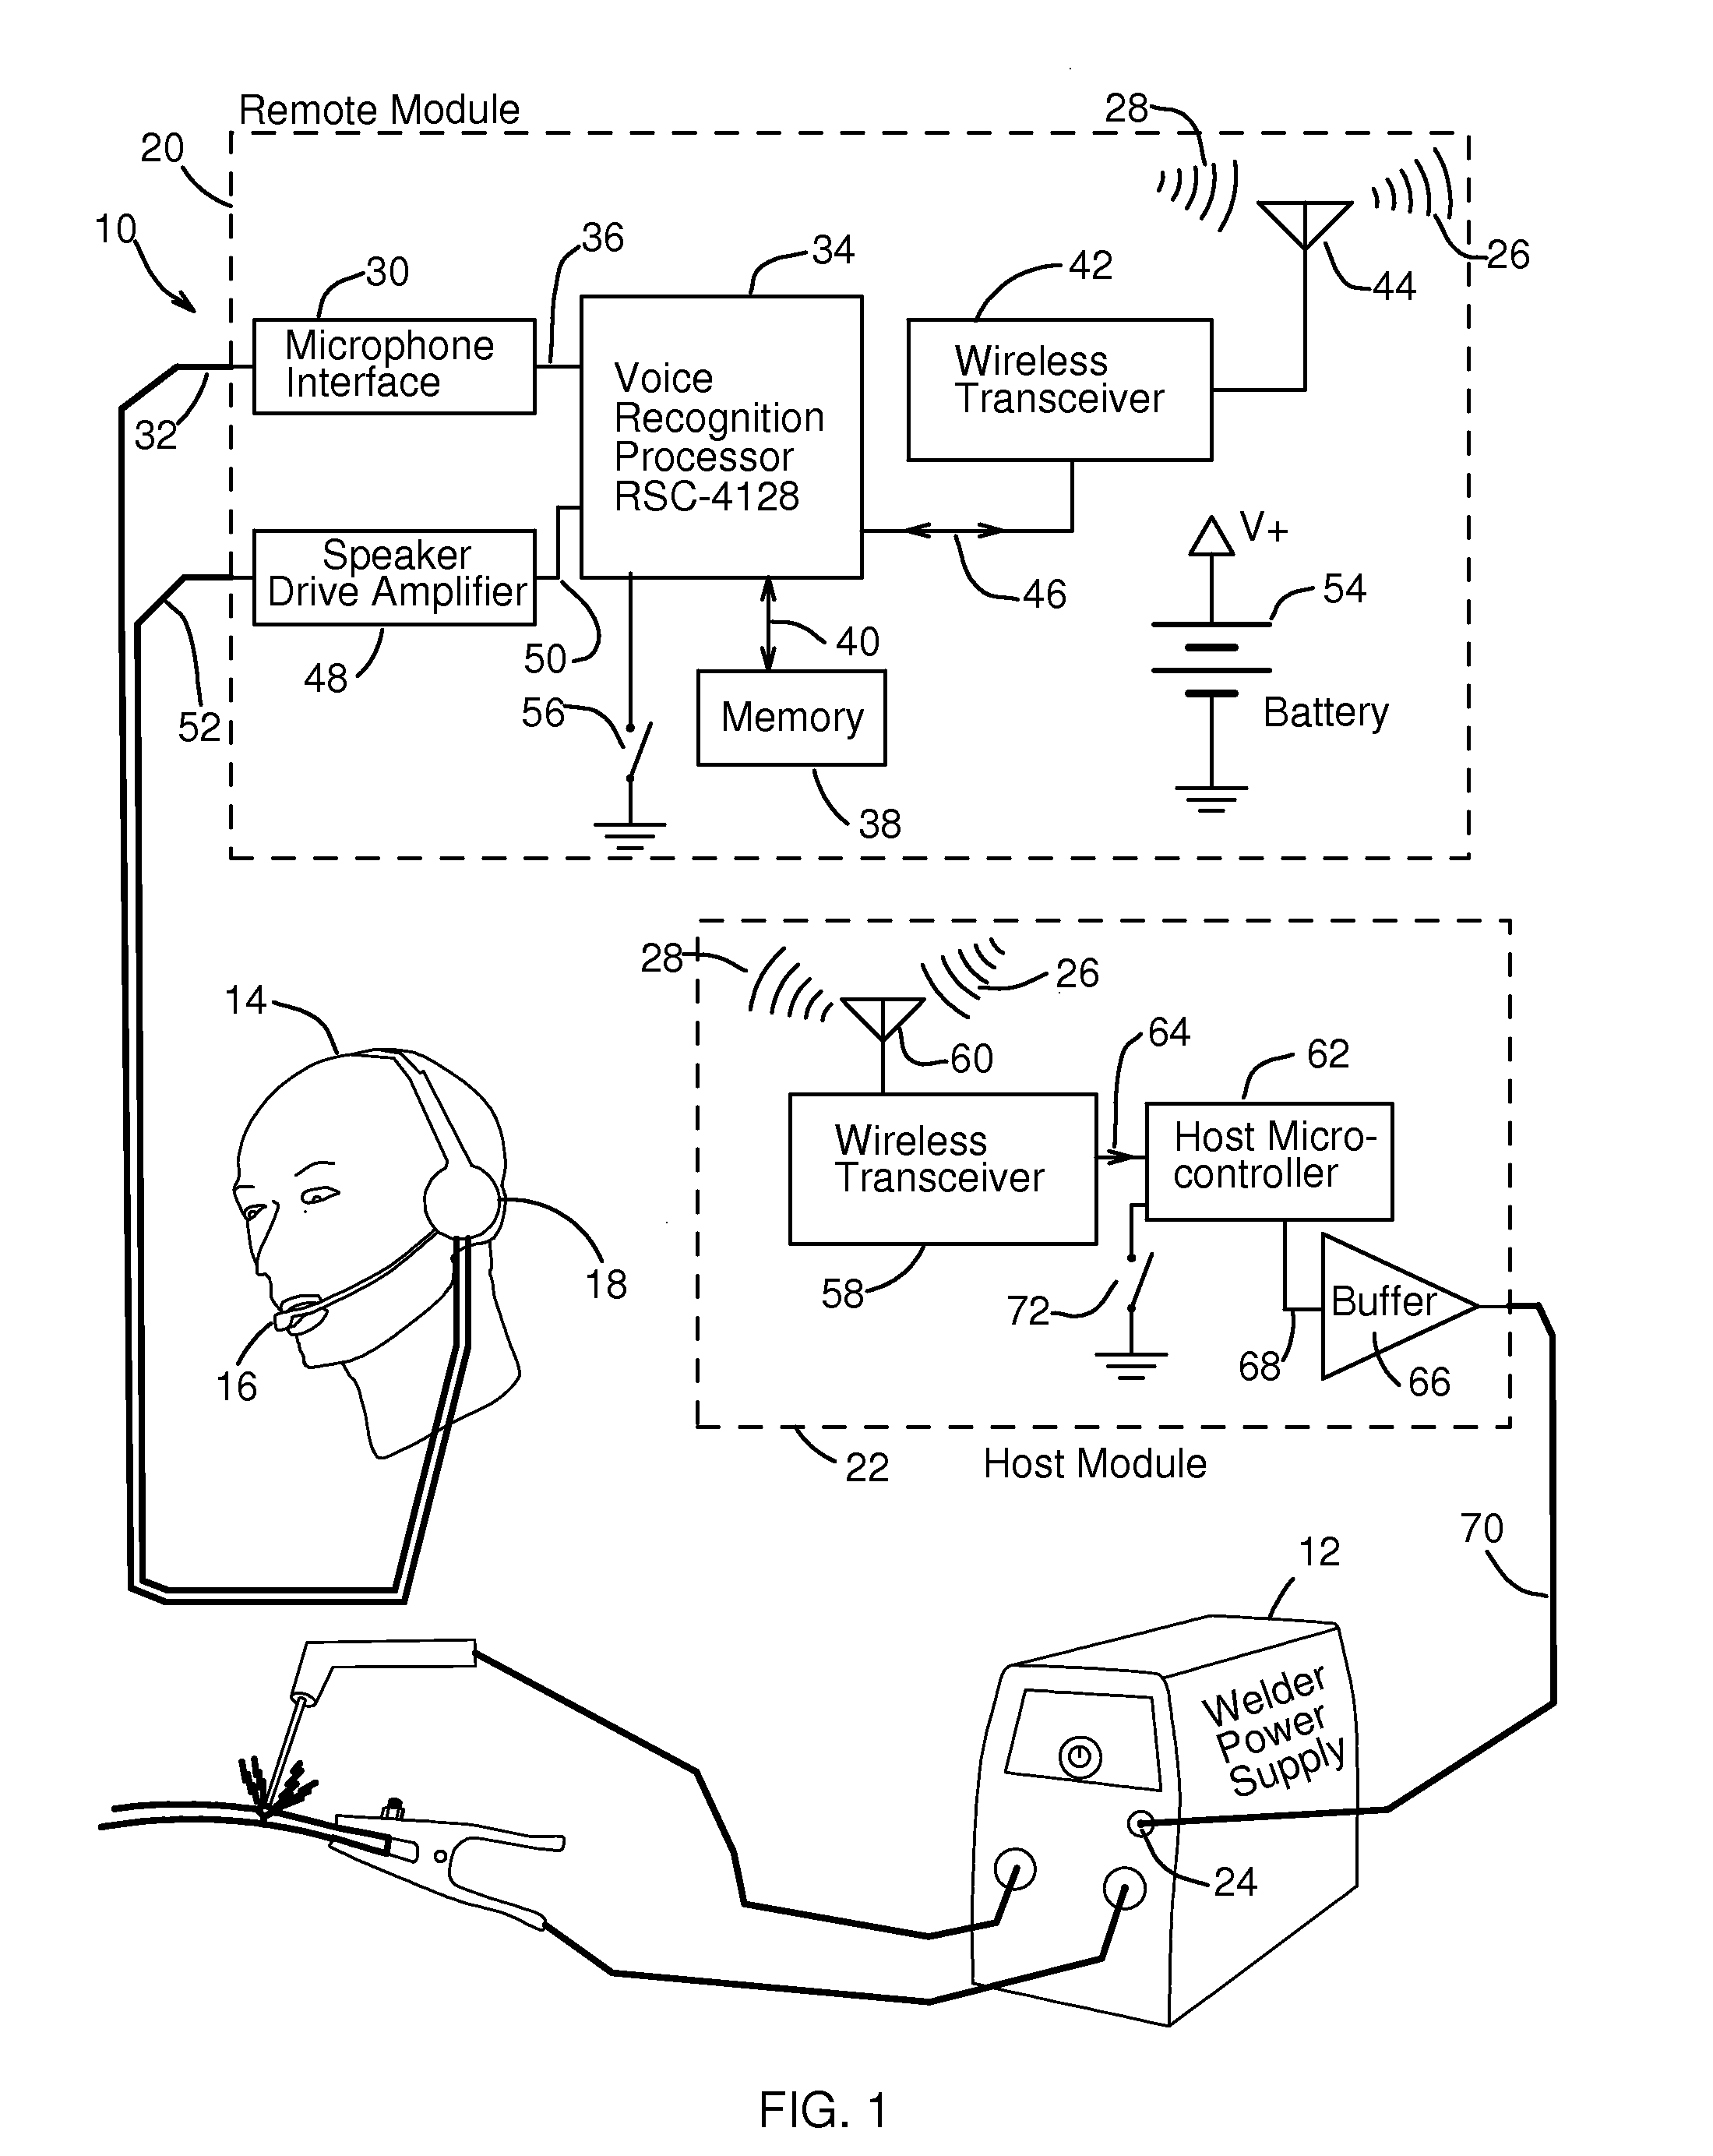 Wireless voice recognition control system for controlling a welder power supply by voice commands